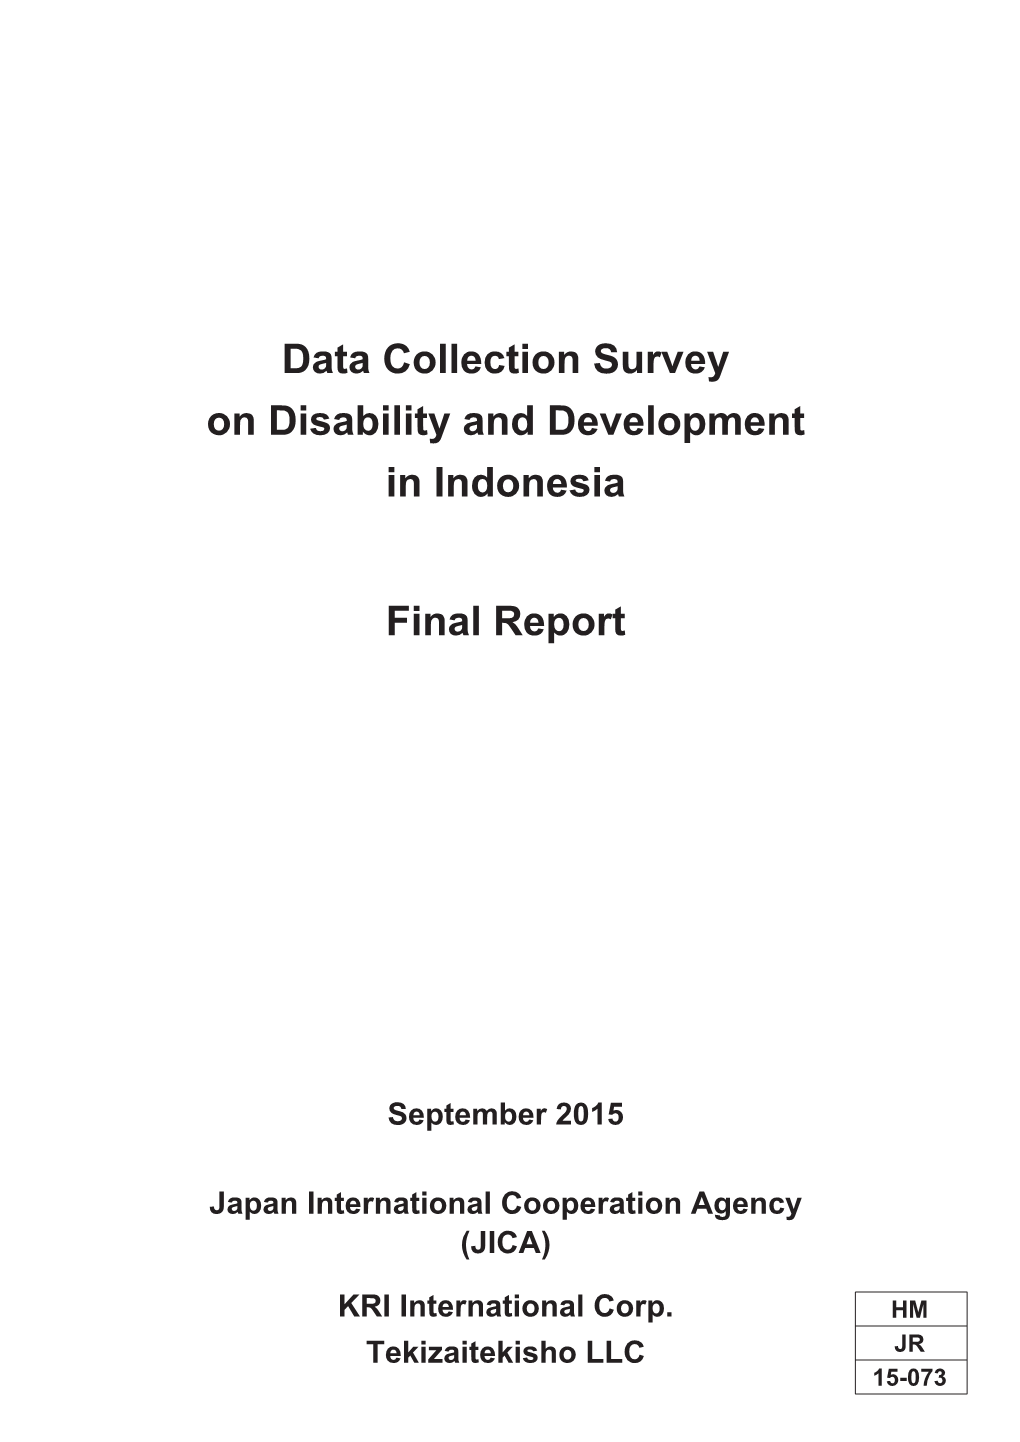 Data Collection Survey on Disability and Development in Indonesia